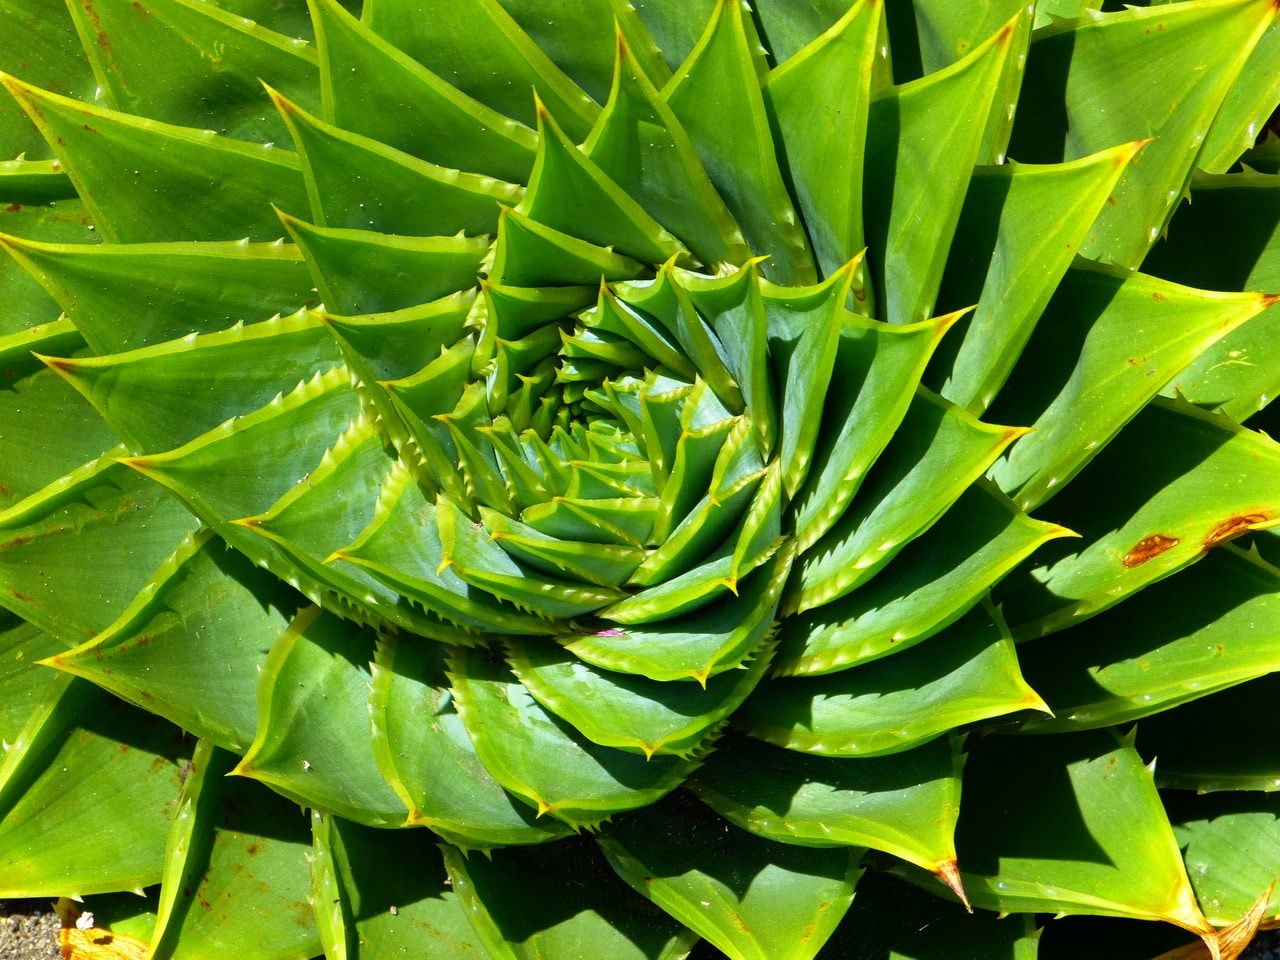 All about Aloe polyphylla, the spiral aloe